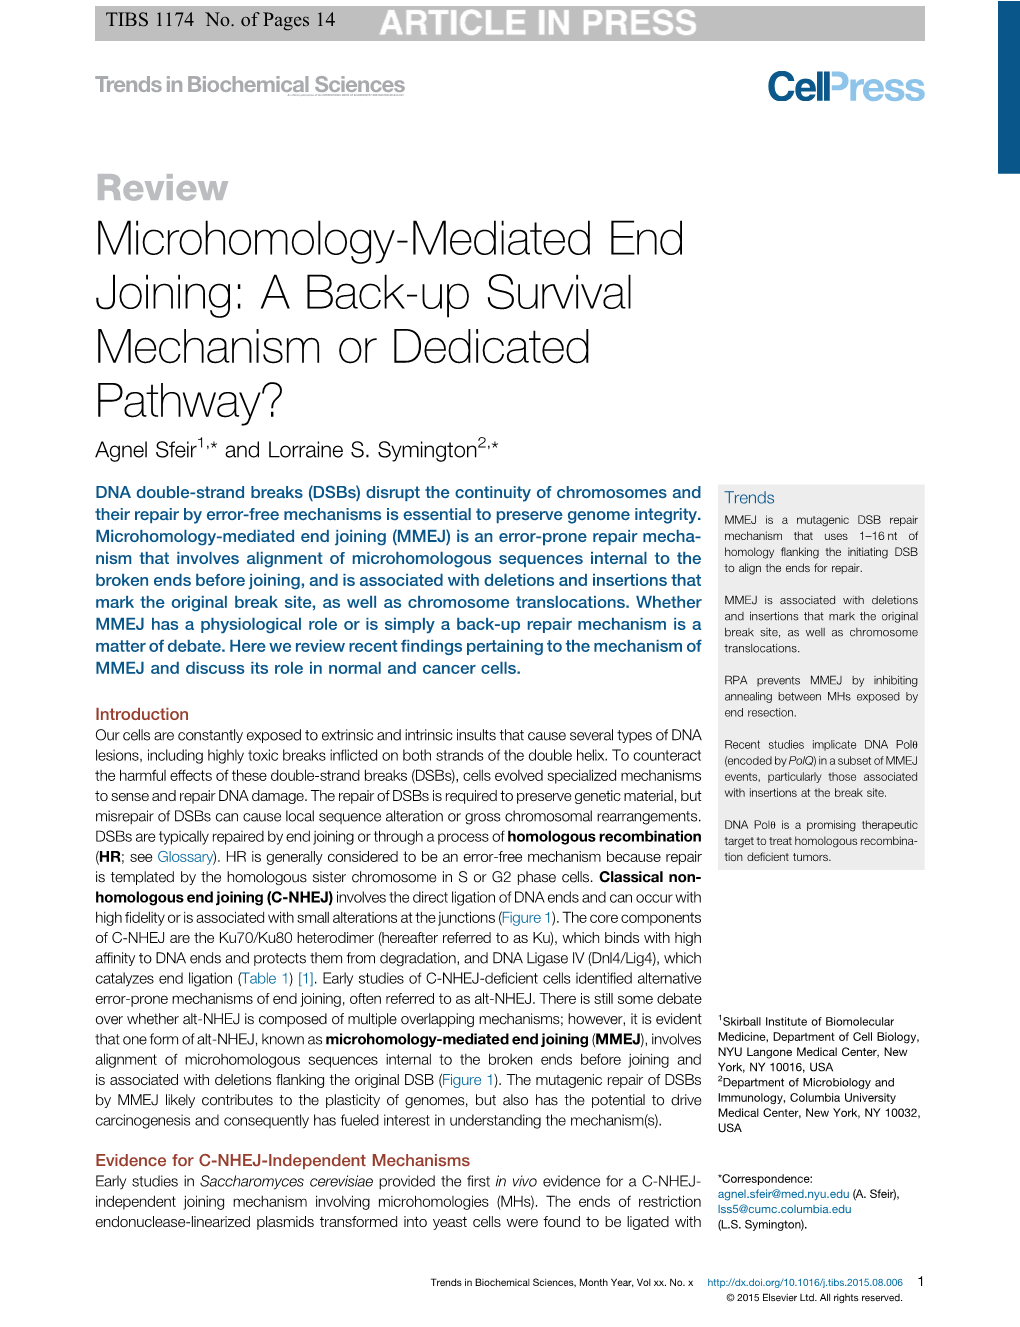 Microhomology-Mediated End Joining: a Back-Up Survival Mechanism Or Dedicated Pathway? Agnel Sfeir1,* and Lorraine S